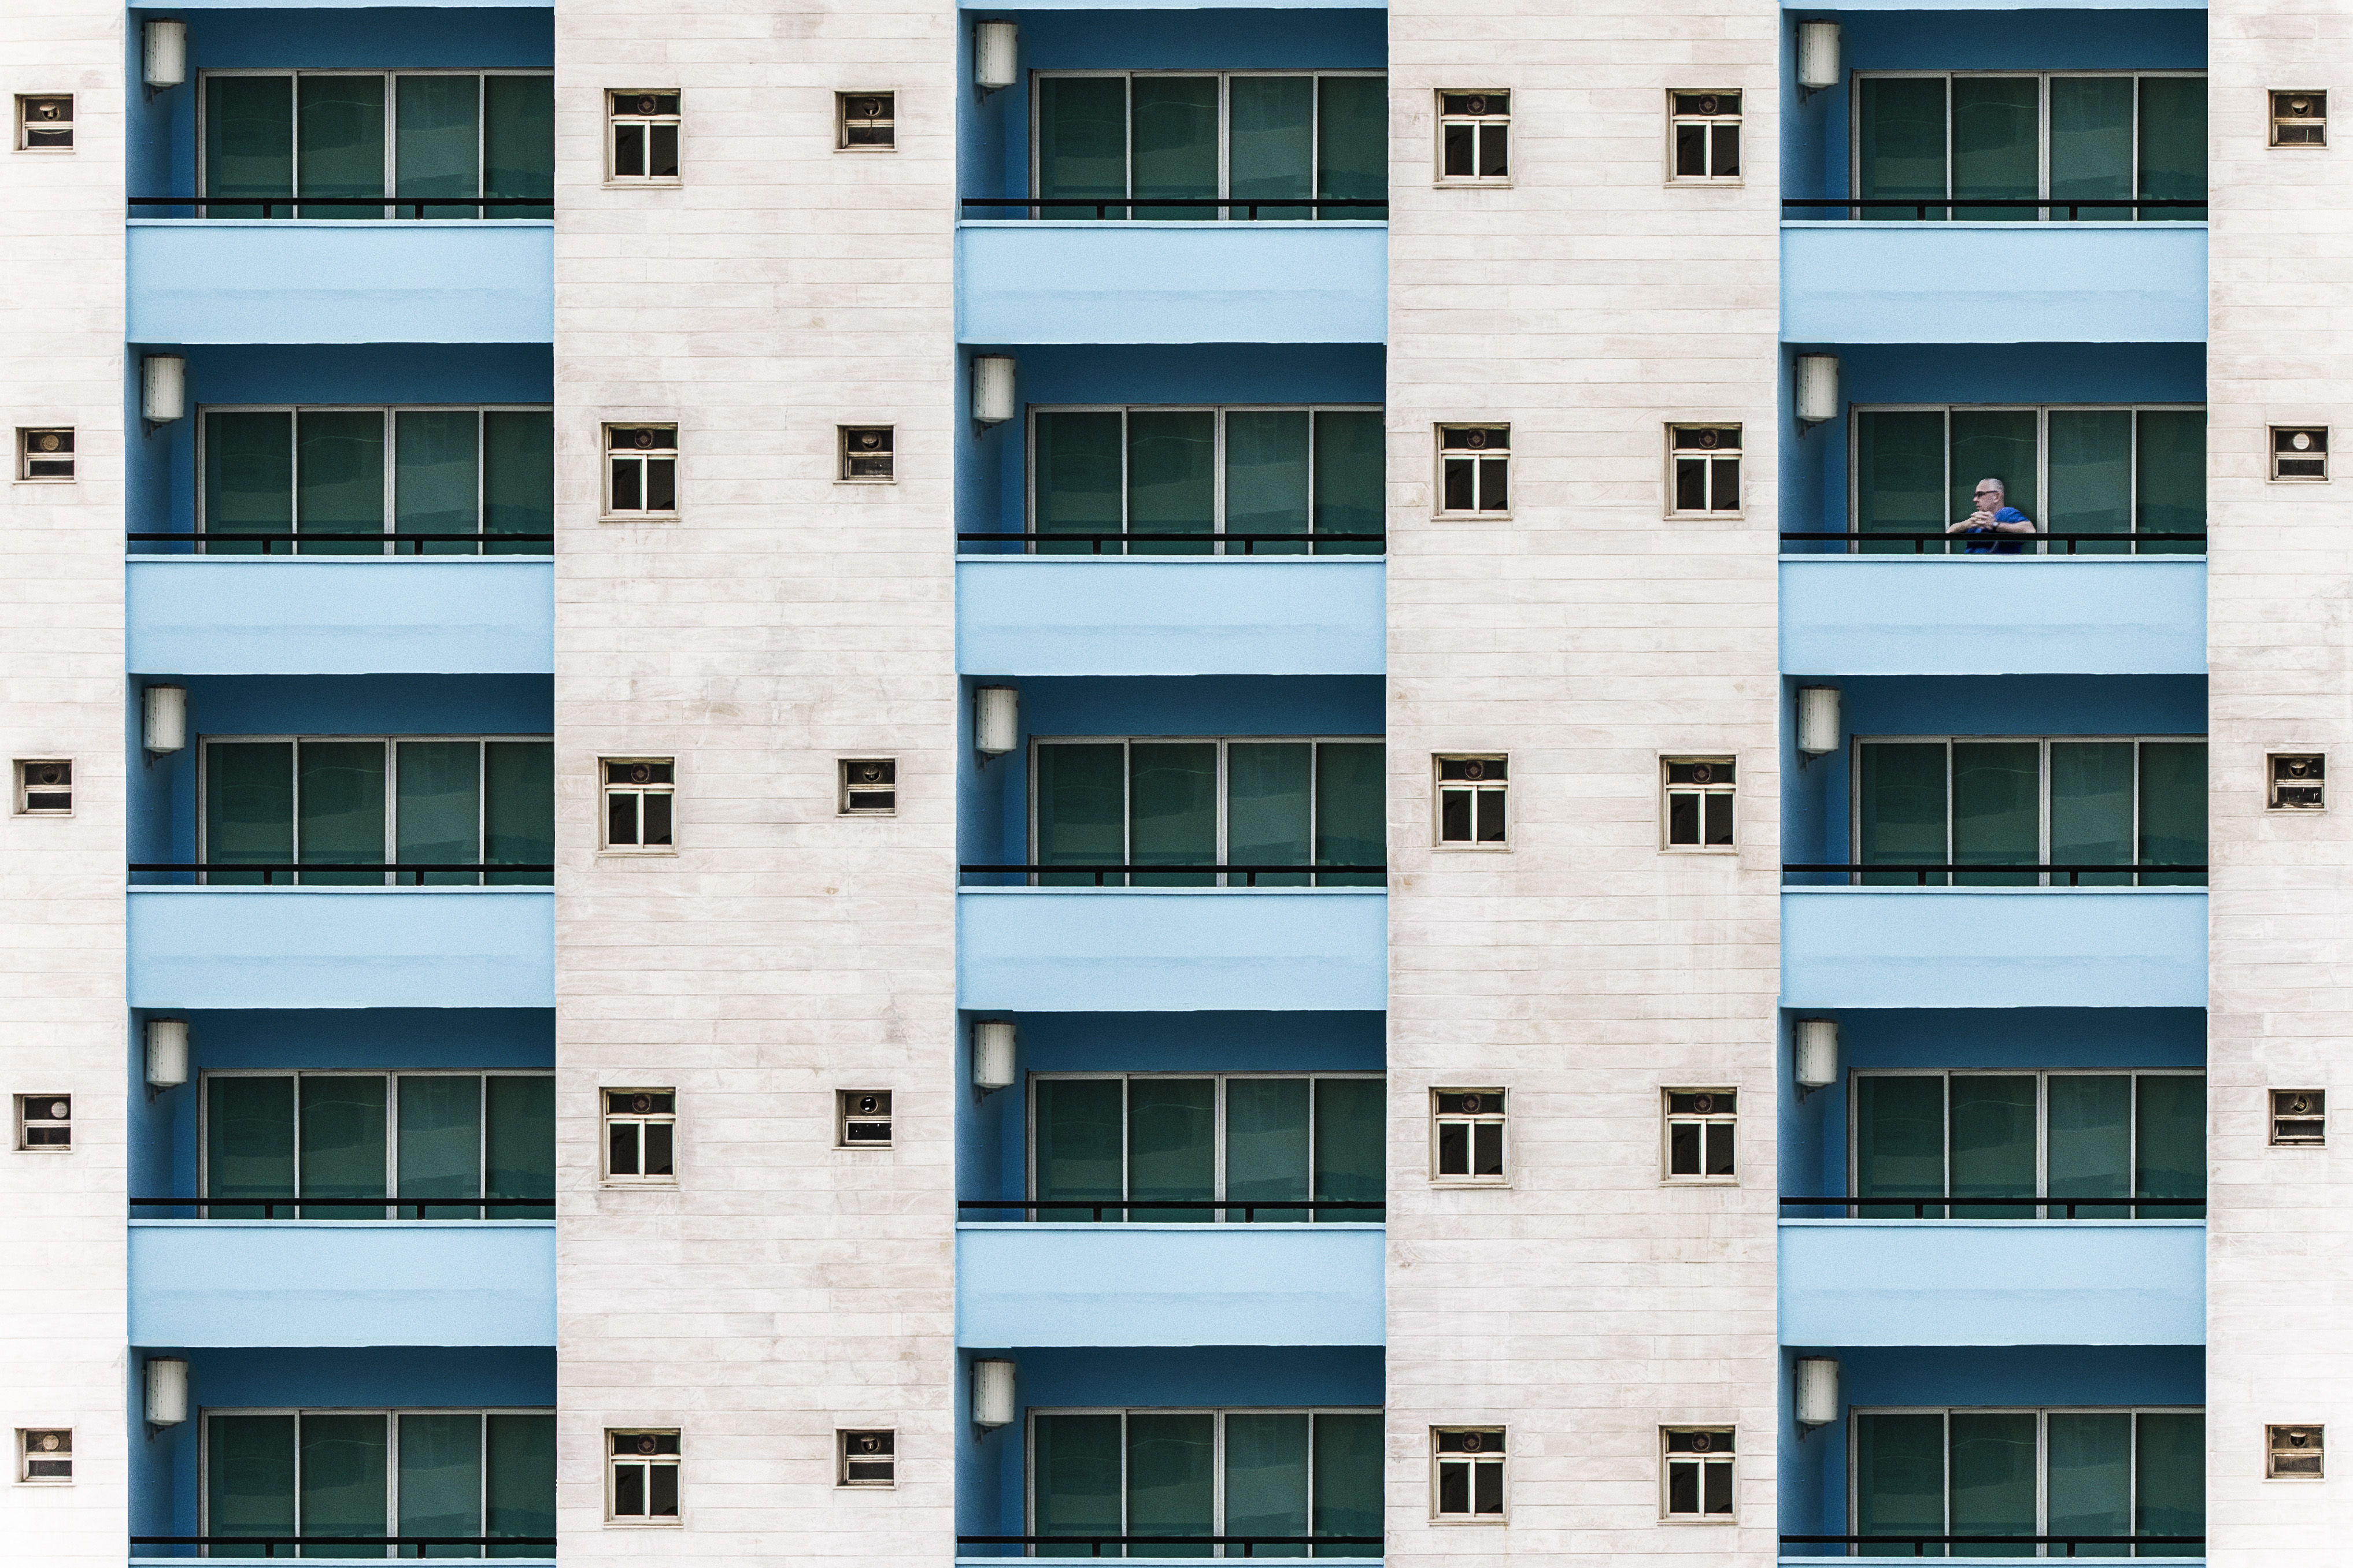 Free Images : windows, blue, abstract, architecture, facade ...